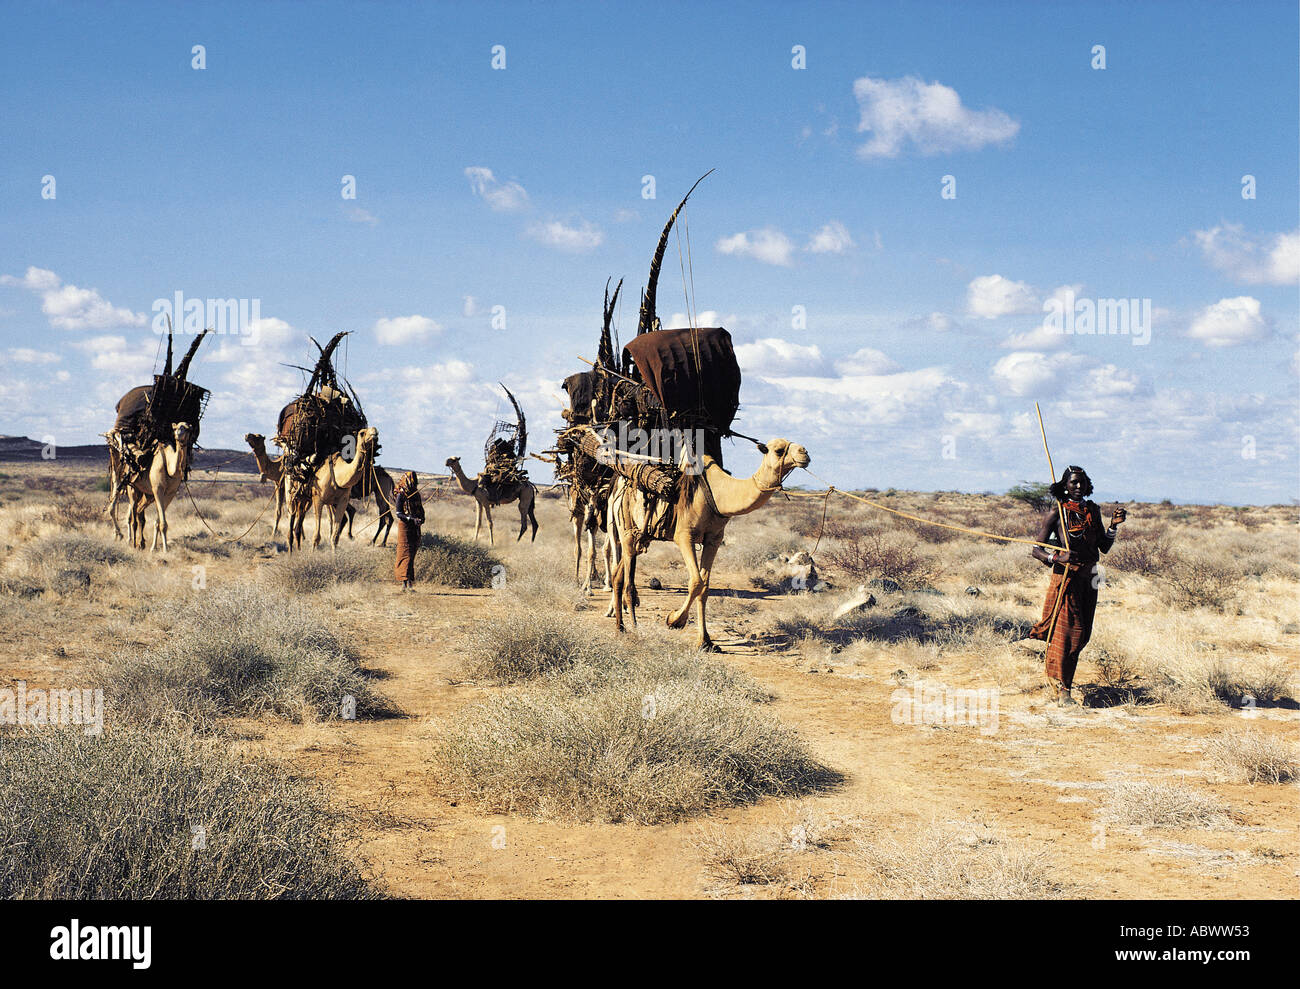 Gabbra woman leading a chain of camels during migration Stock Photo